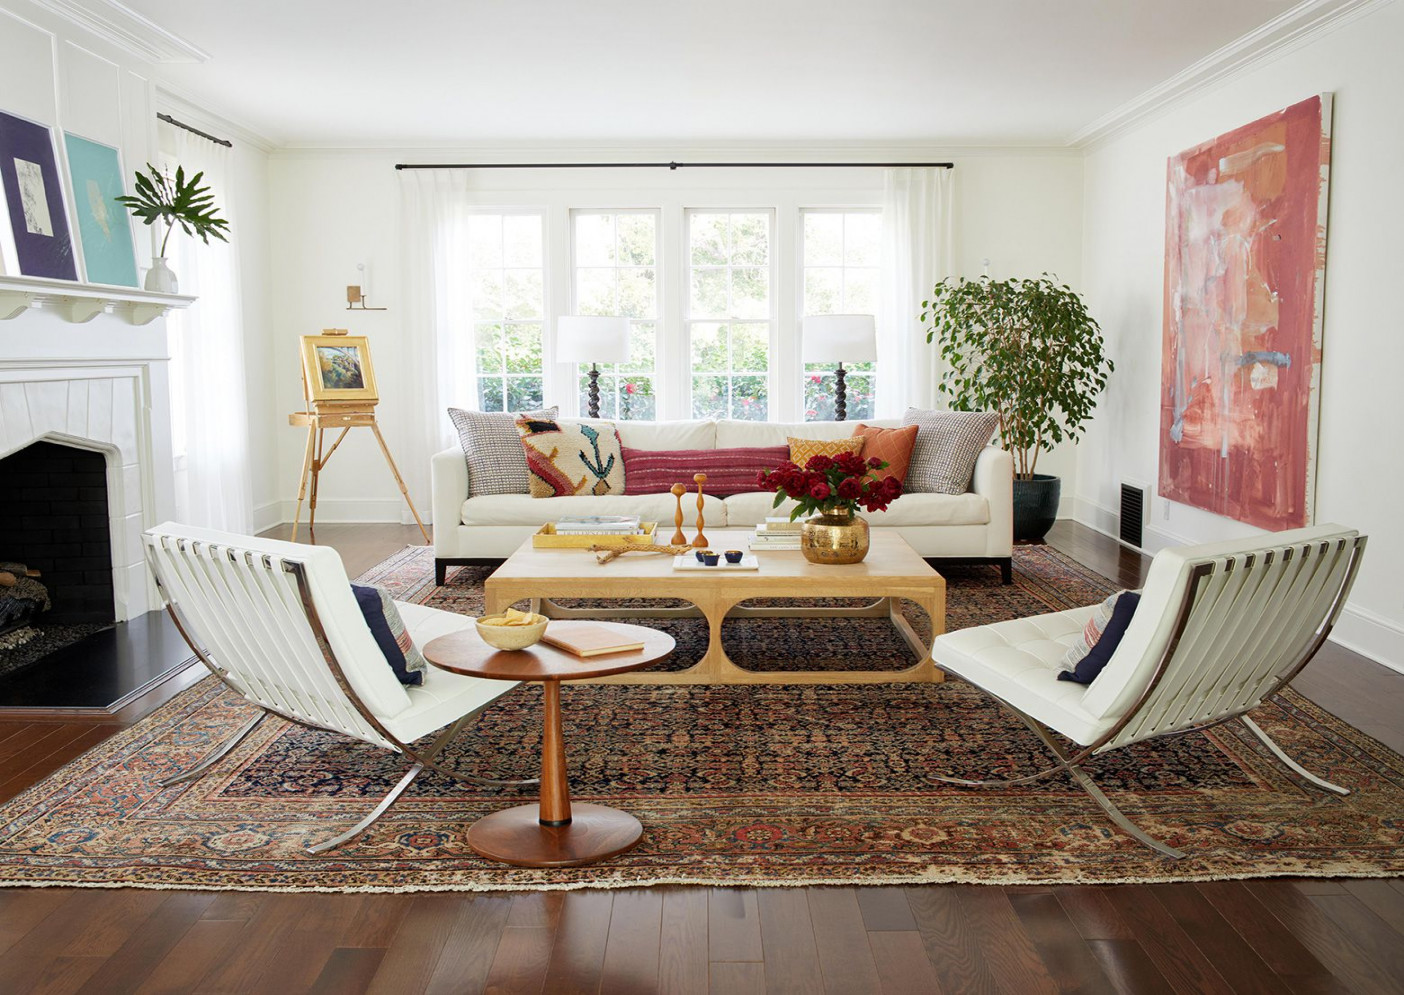 Living Room Furniture Layouts That Make the Most of Your Space